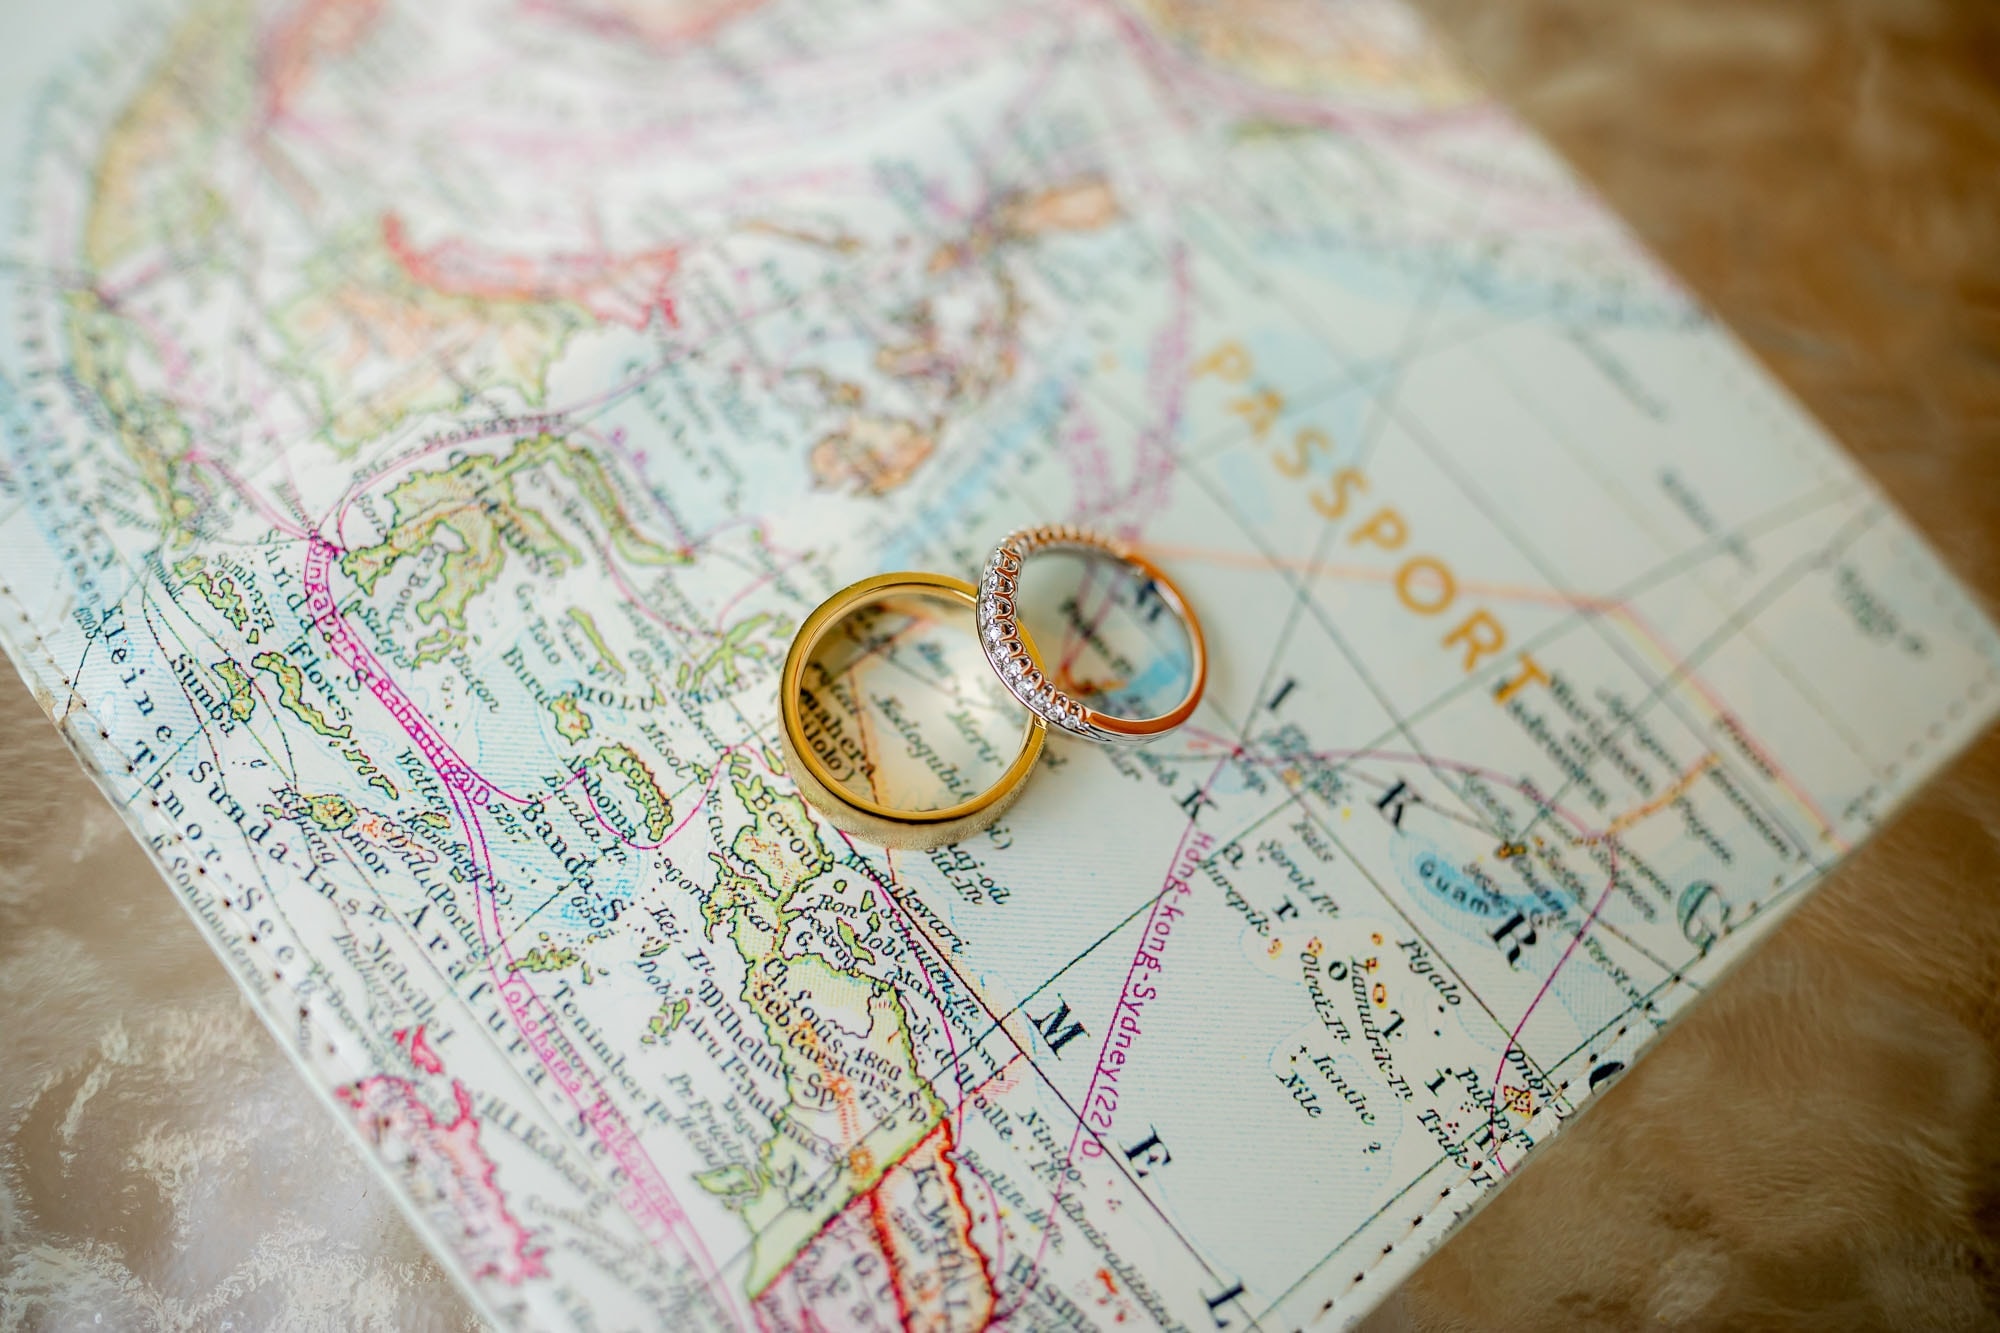 wedding rings shown on a map